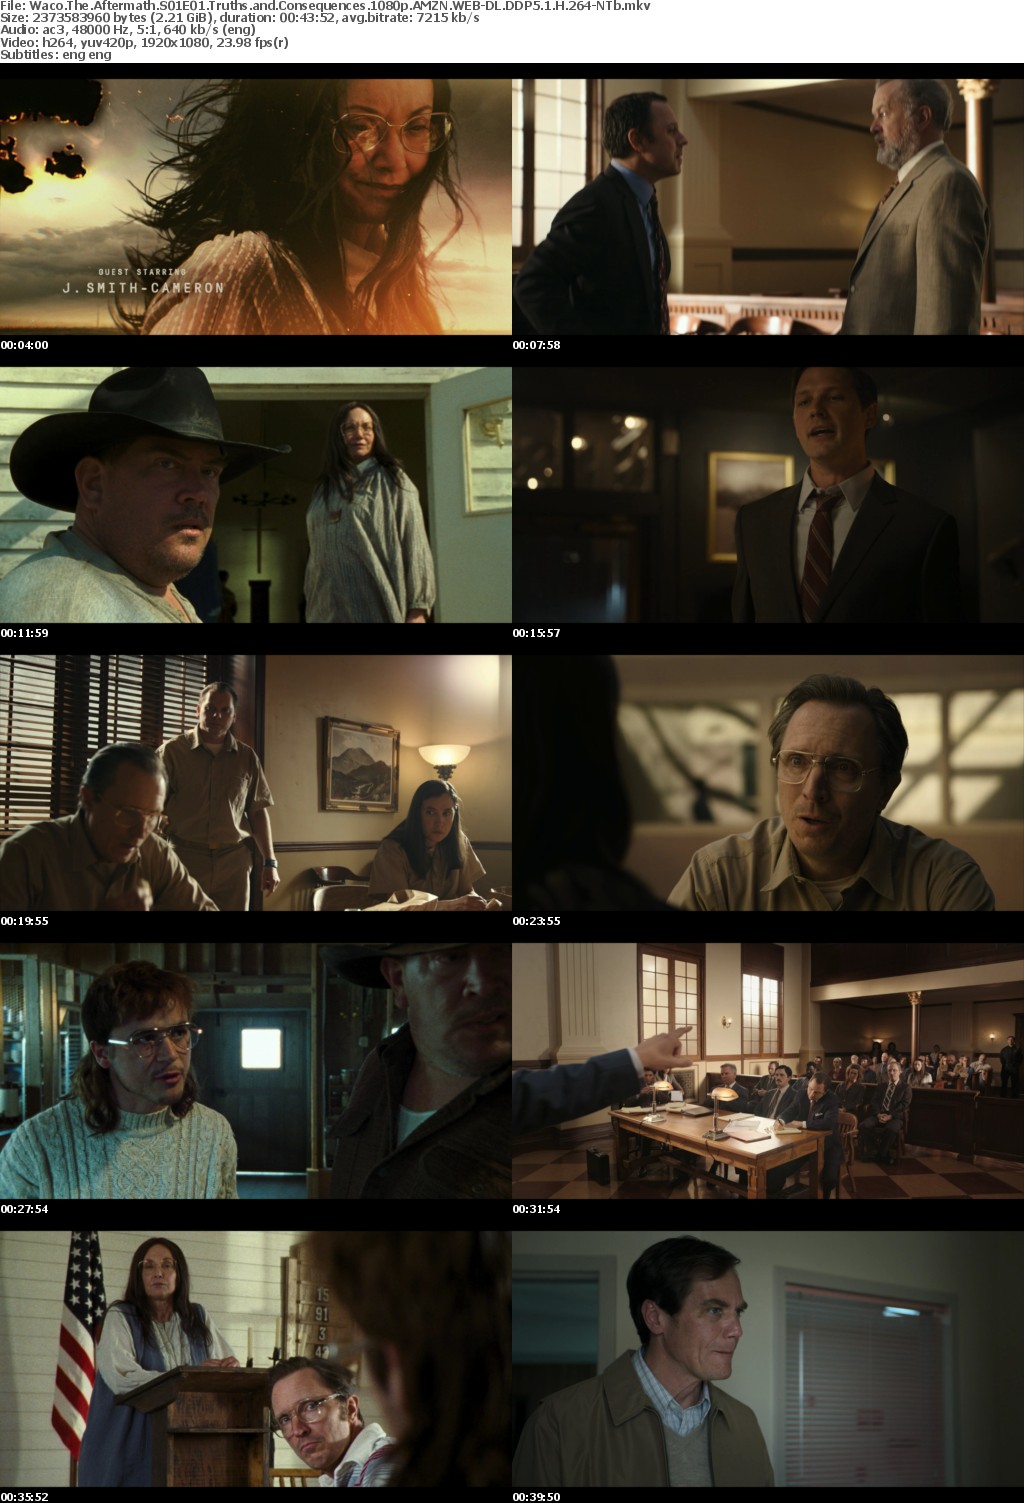 Waco The Aftermath S01E01 Truths and Consequences 1080p AMZN WEBRip DDP5 1 x264-NTb